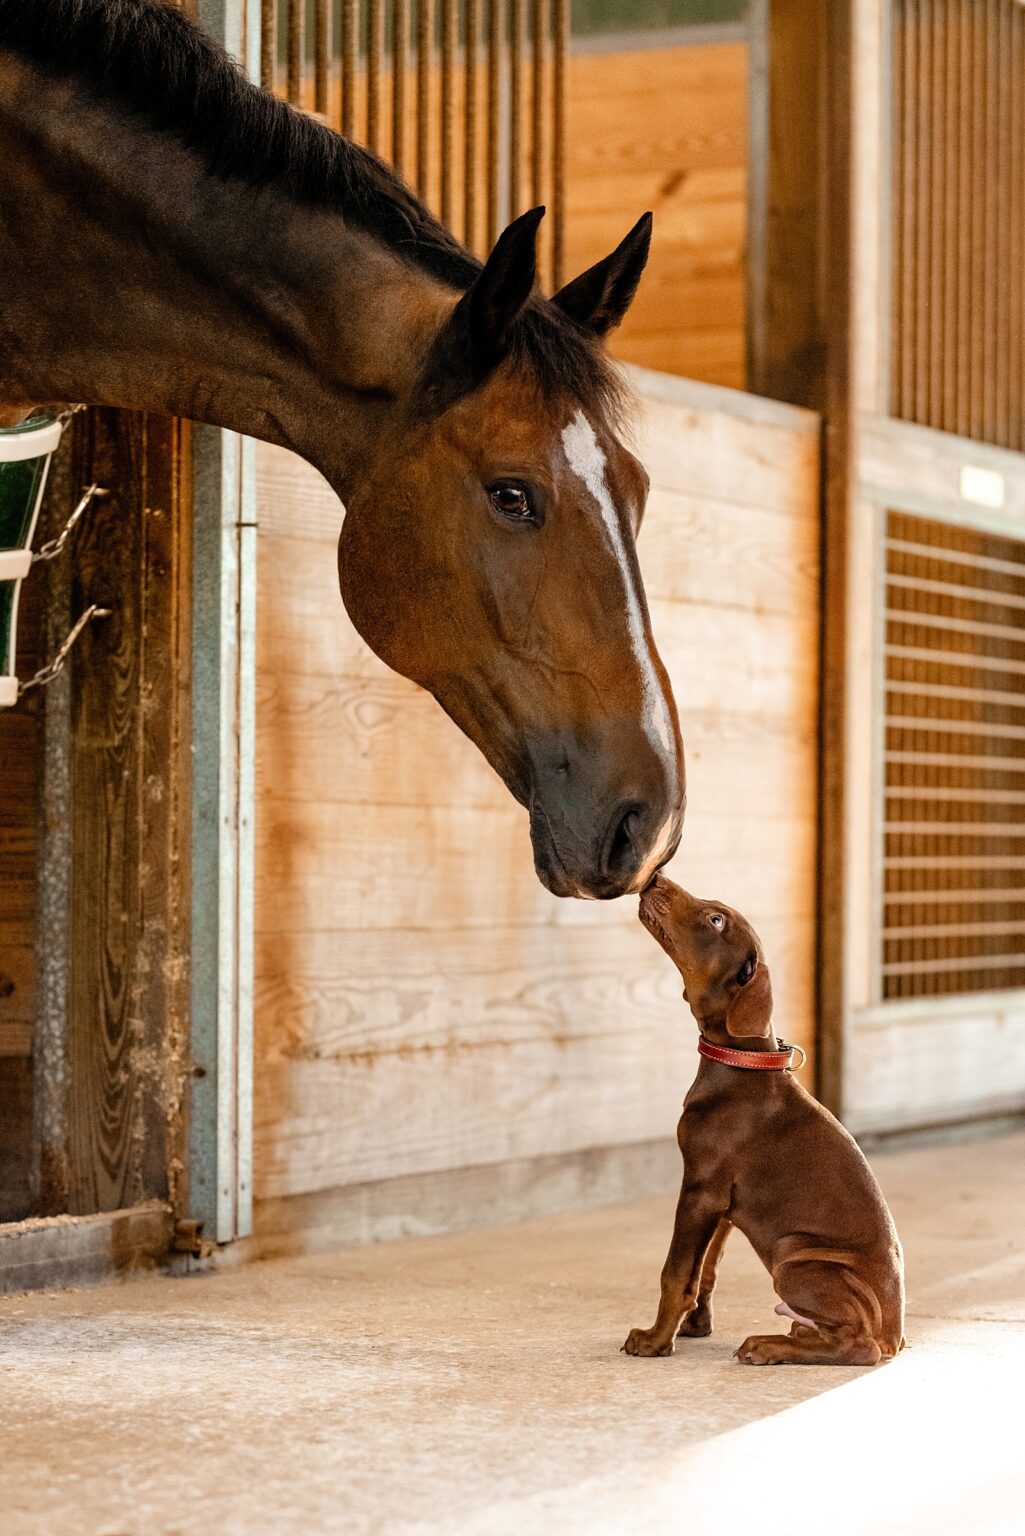 Cute photo of horse with his head outside of a stall door sniffing a puppies nose. Horse and puppy.